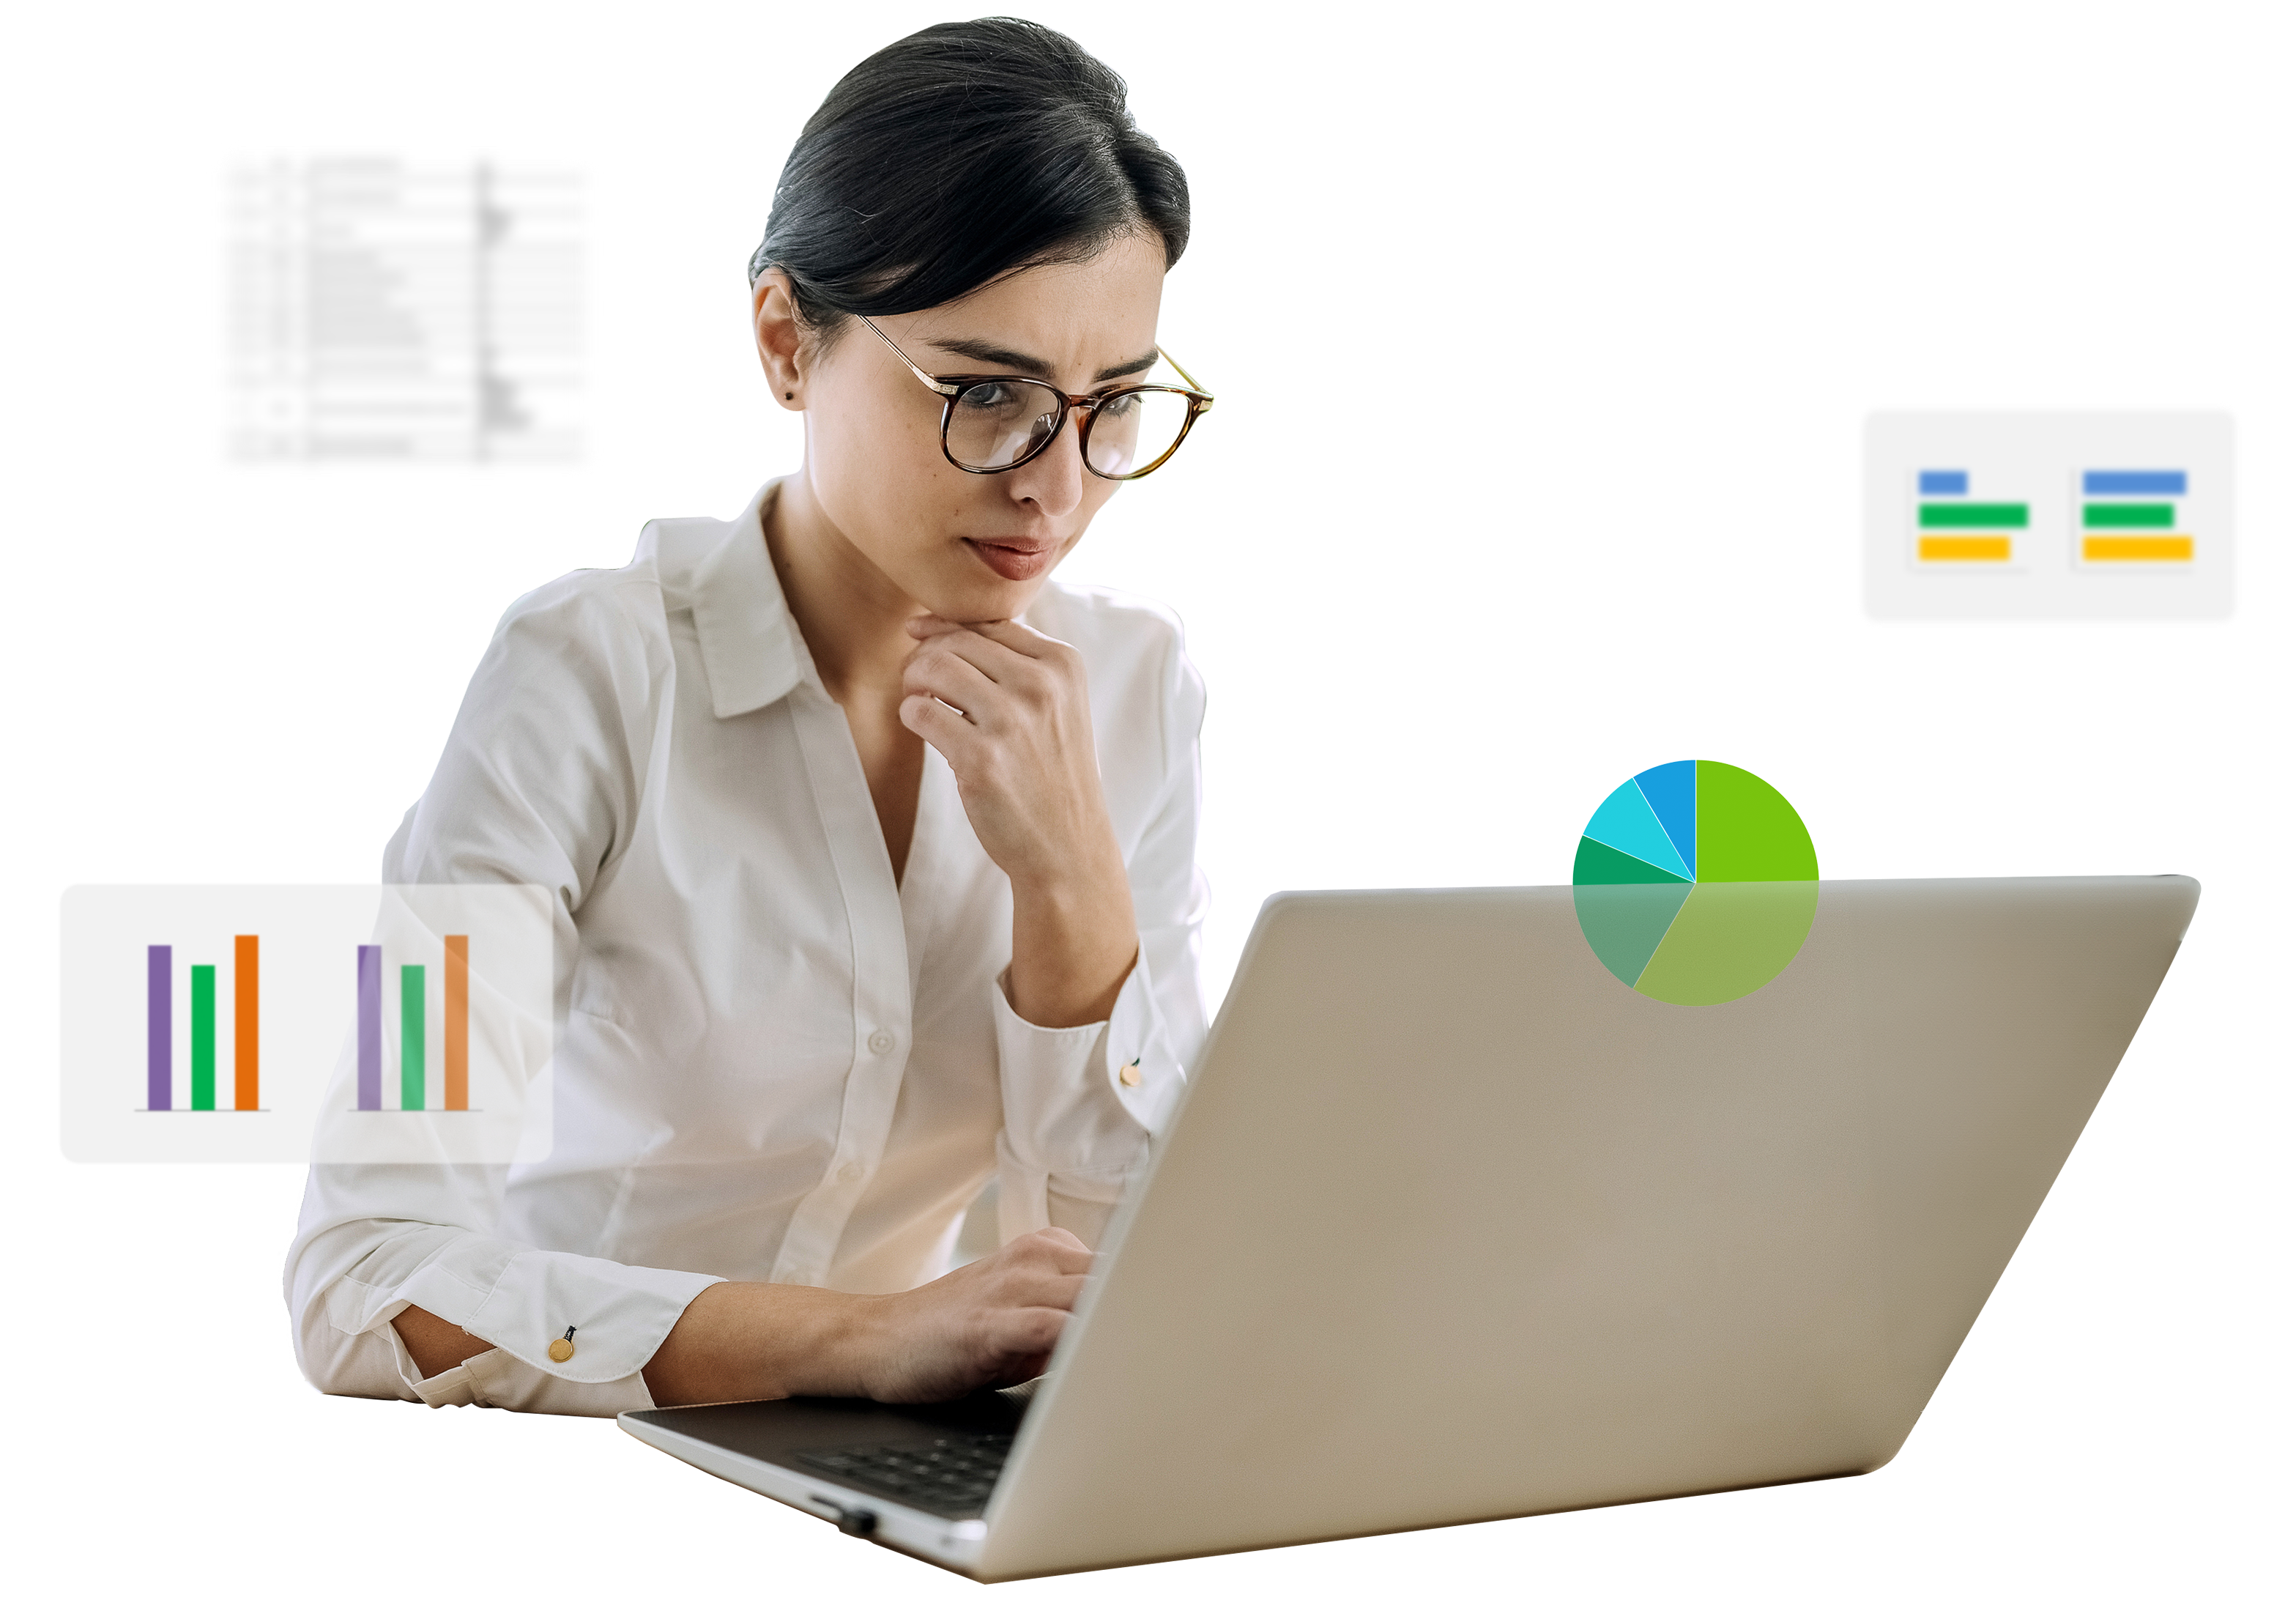 Woman staring closely at a laptop screen with pie charts and bar graphs hovering in the space surrounding her